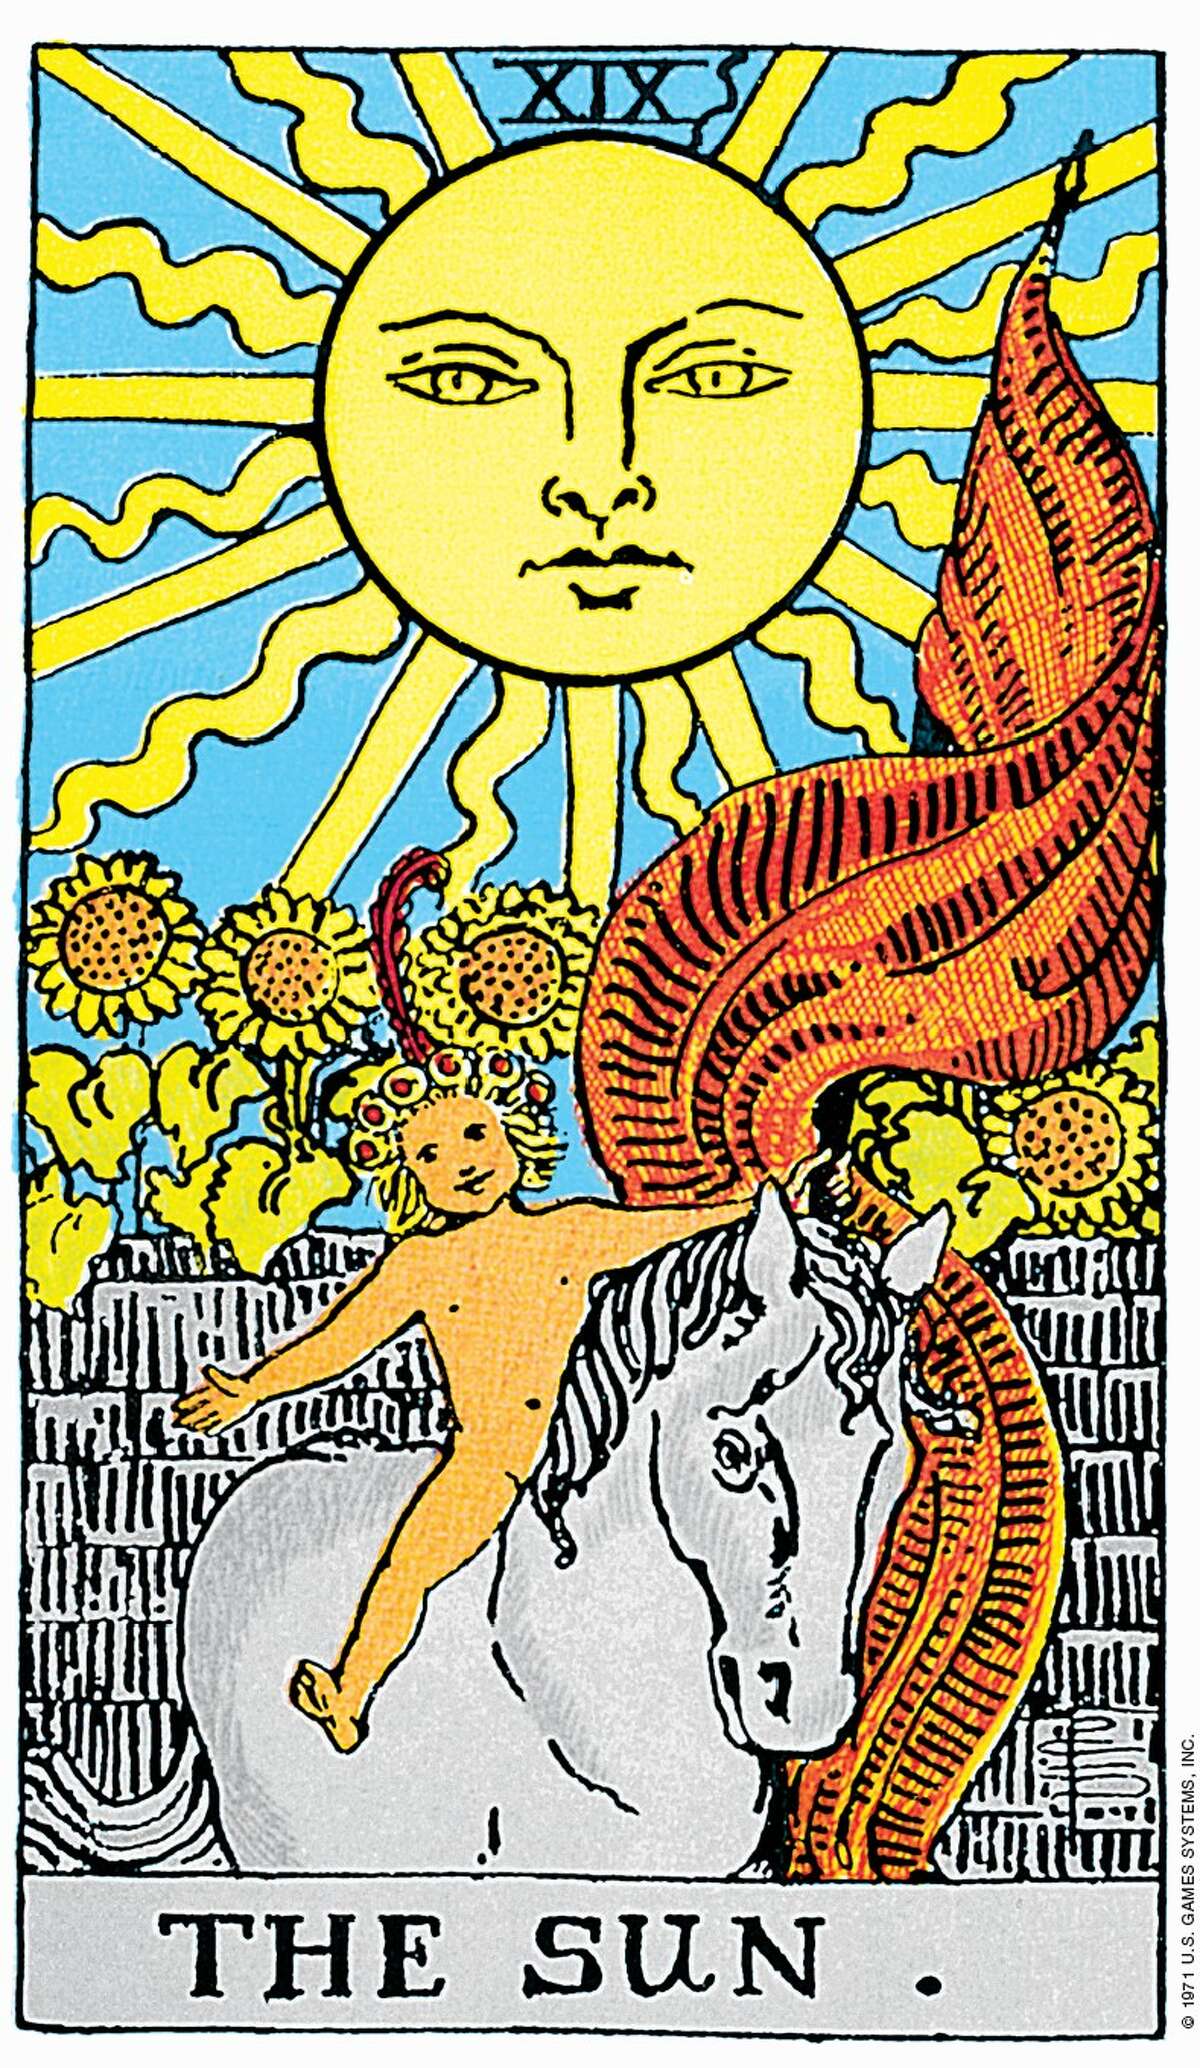 Tarot cards come in a variety of designs, but the Rider-Waite deck more or less set the standard for modern day tarot.  Shown here is the Rider-Waite deck sun. 